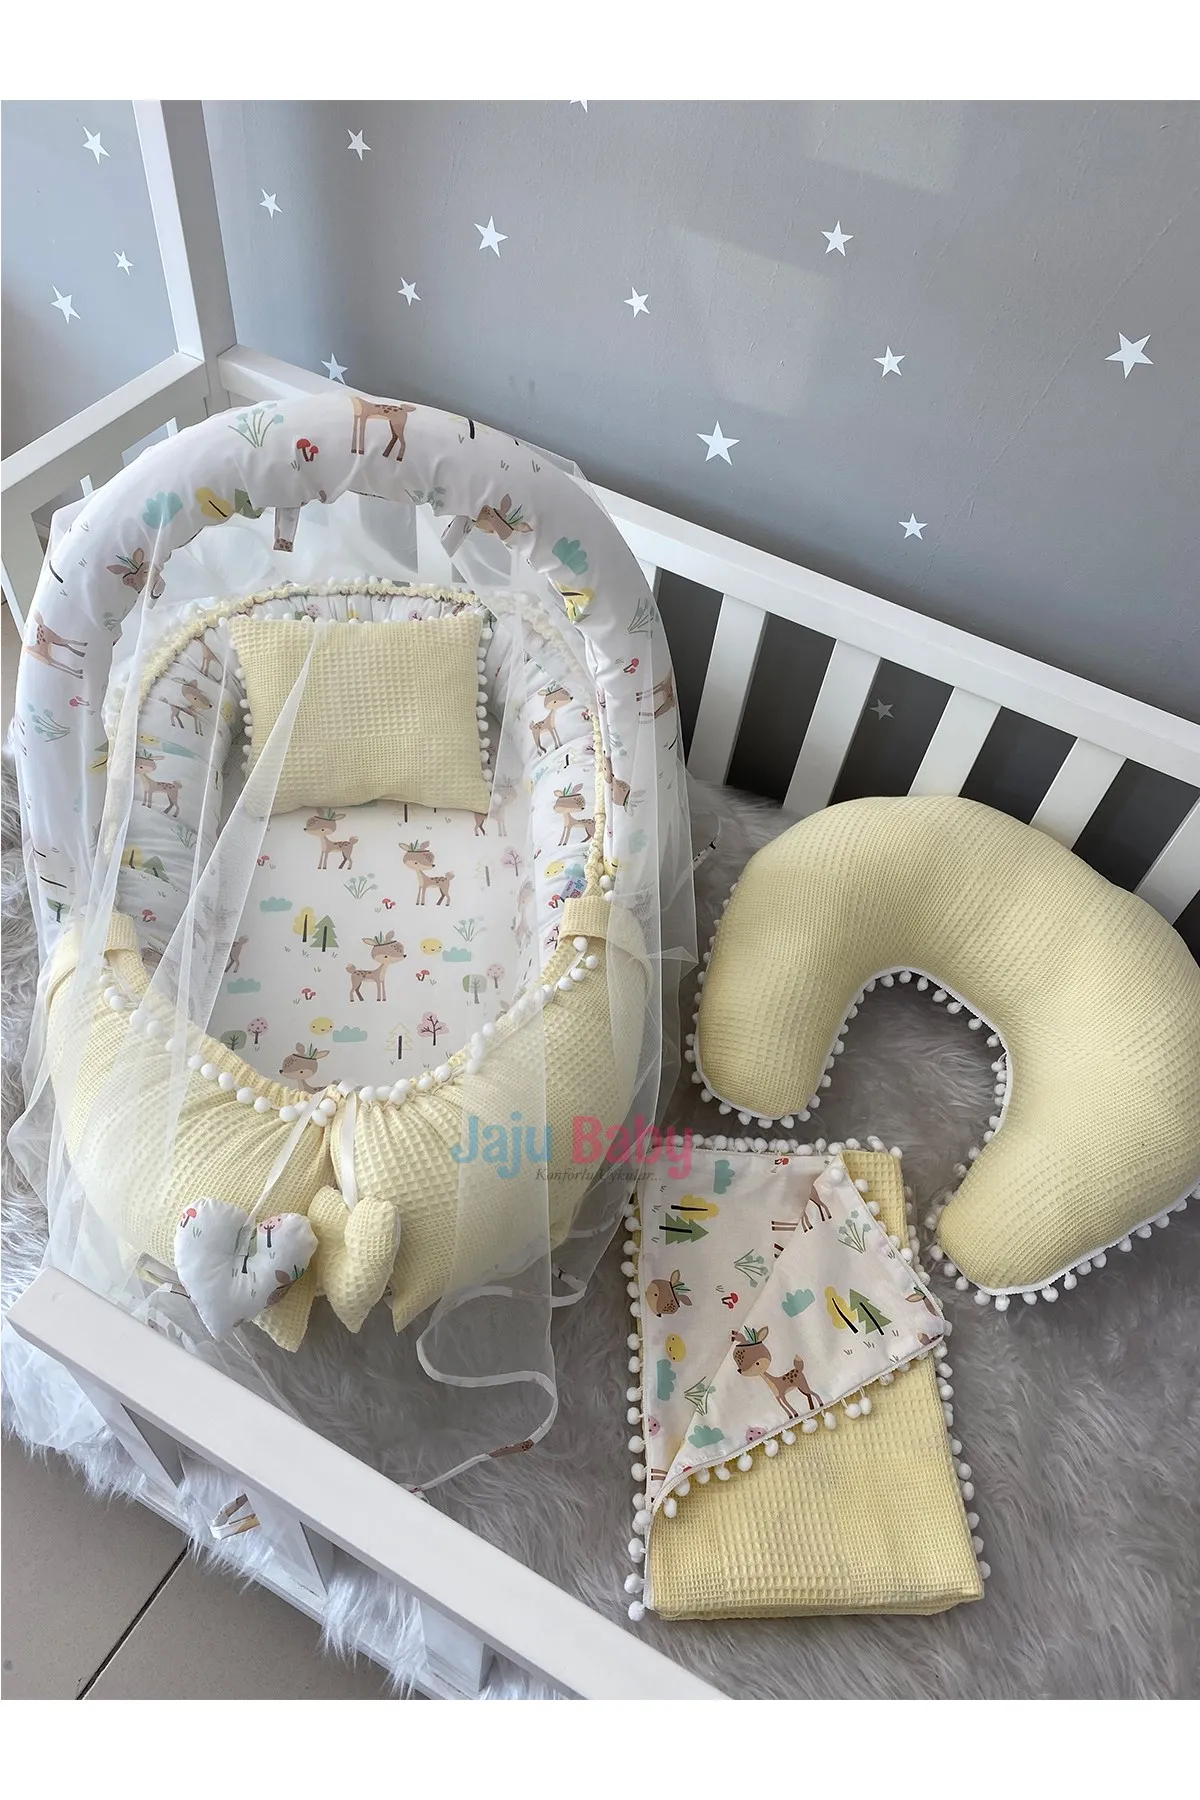 Jaju Baby Handmade Yellow Waffle Pique Fabric Gazelle Design 6 Piece Babynest Set with Pompom Mother Side Portable Baby Bed